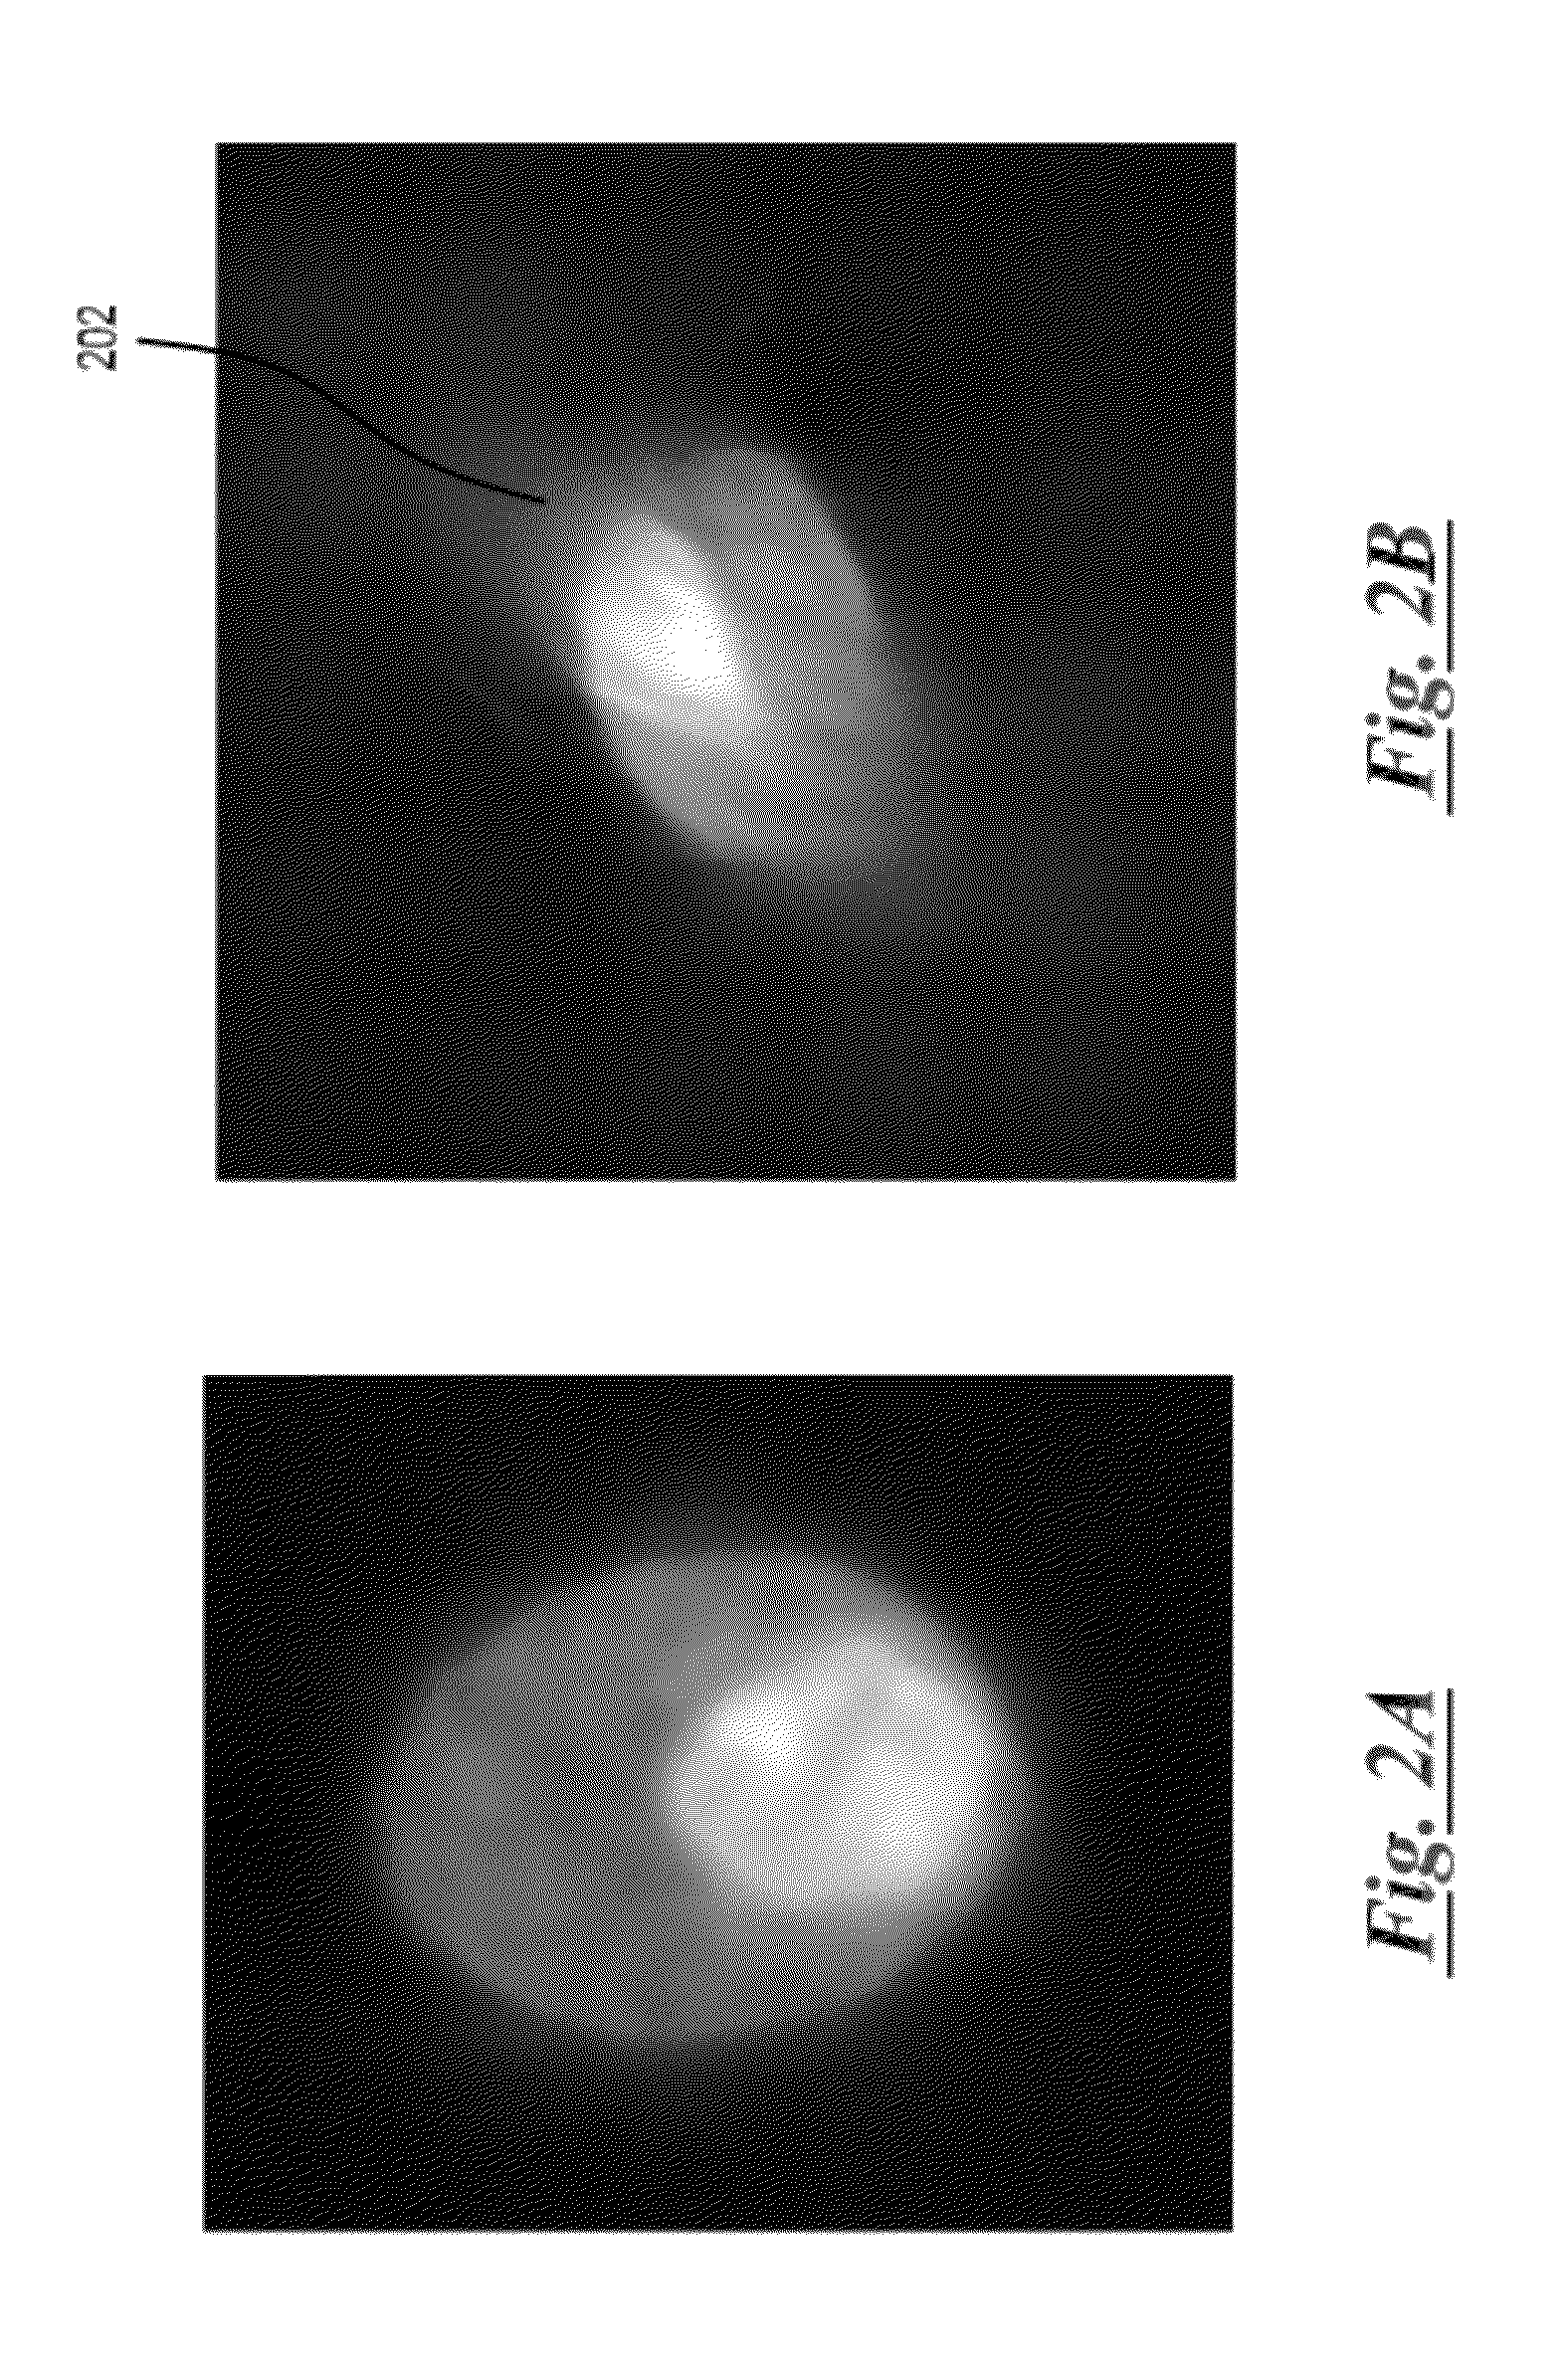 System and method for detecting poor quality in 3D reconstructions